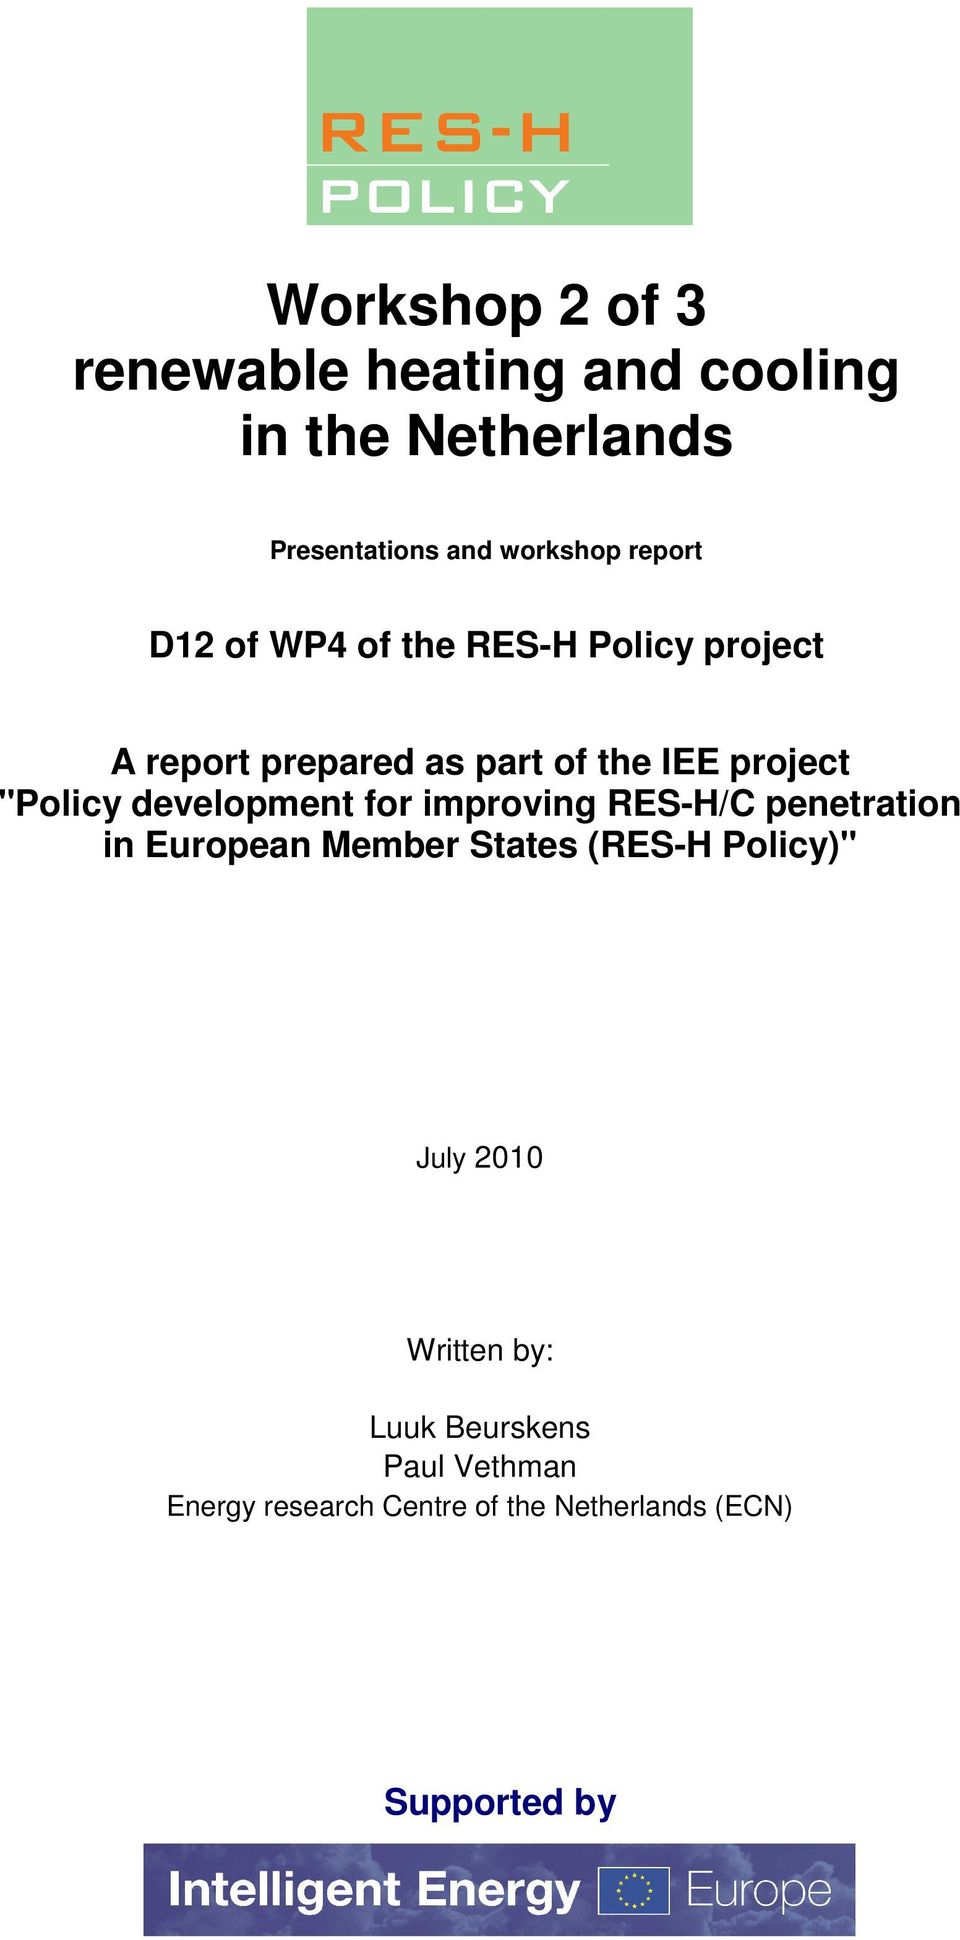 "Policy development for improving RES-H/C penetration in European Member States (RES-H Policy)"